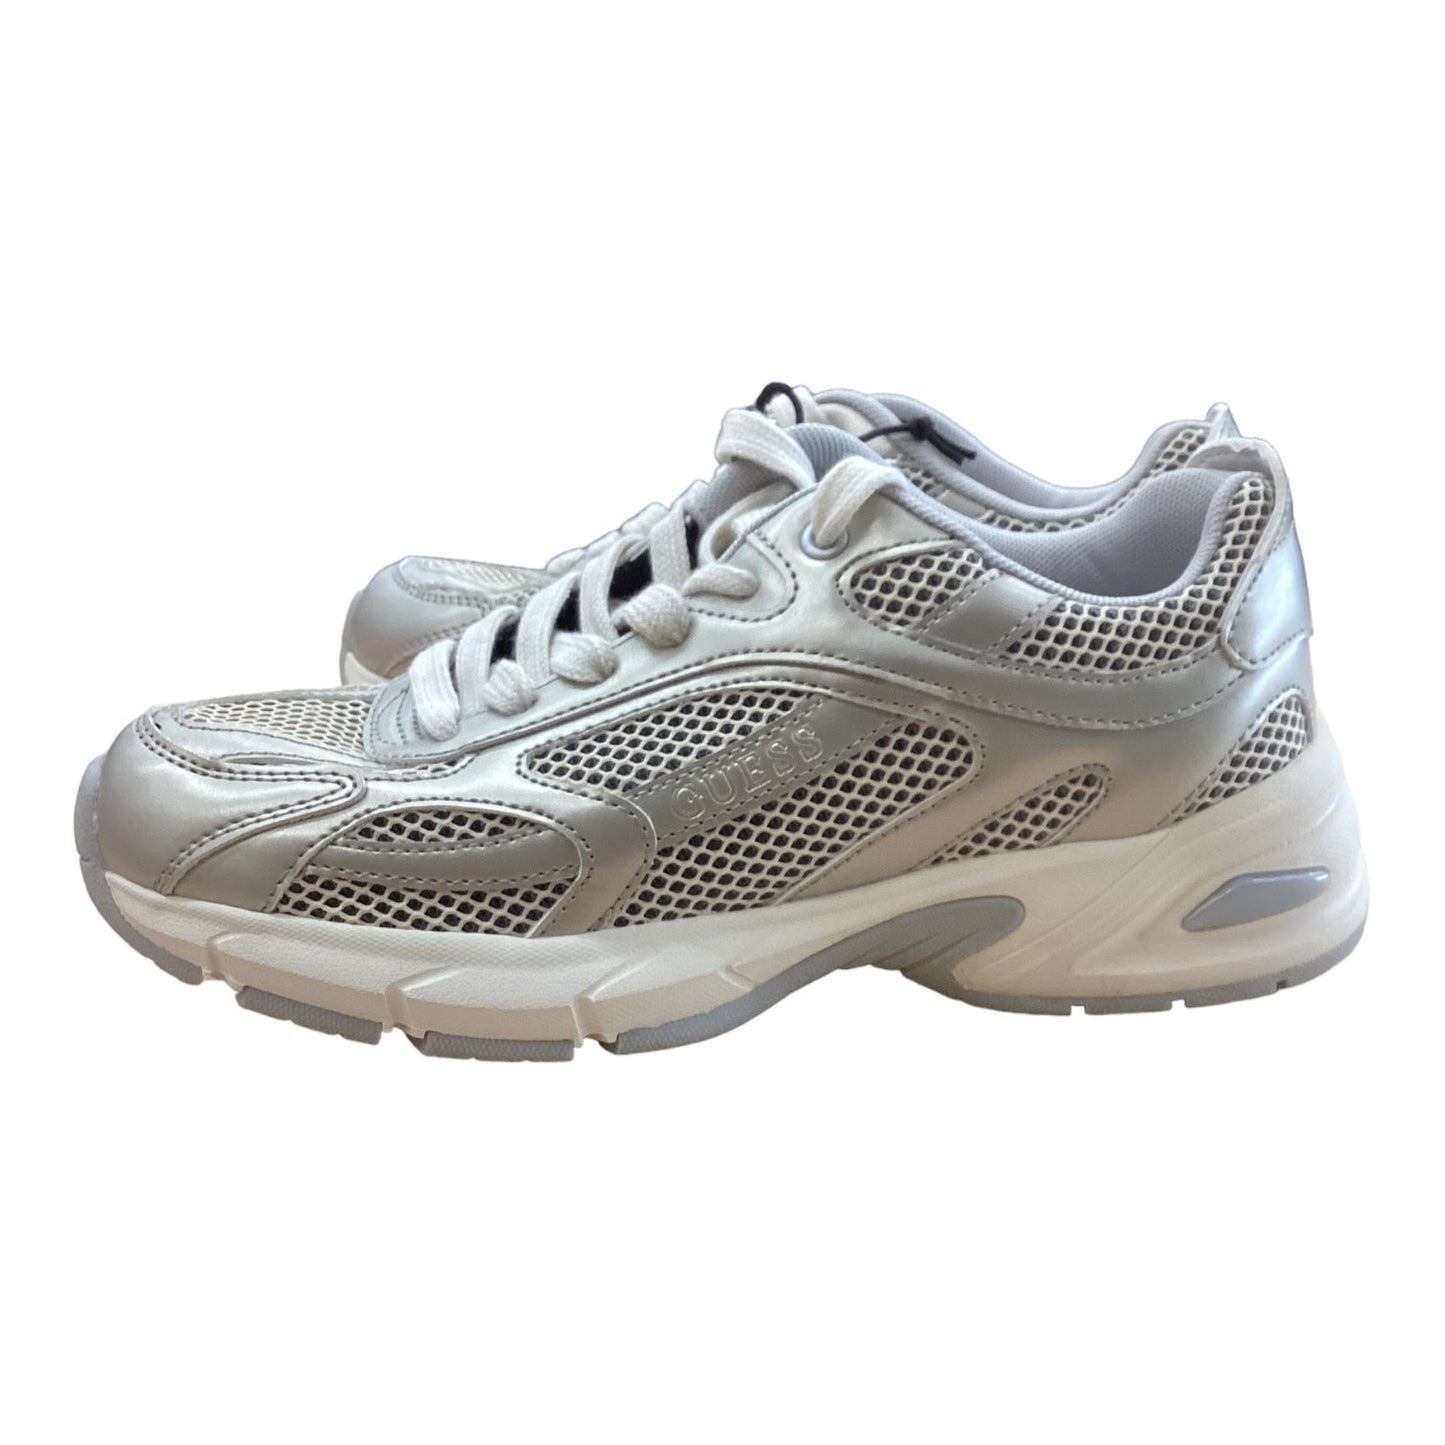 Grey Shoes Athletic Guess, Size 7.5